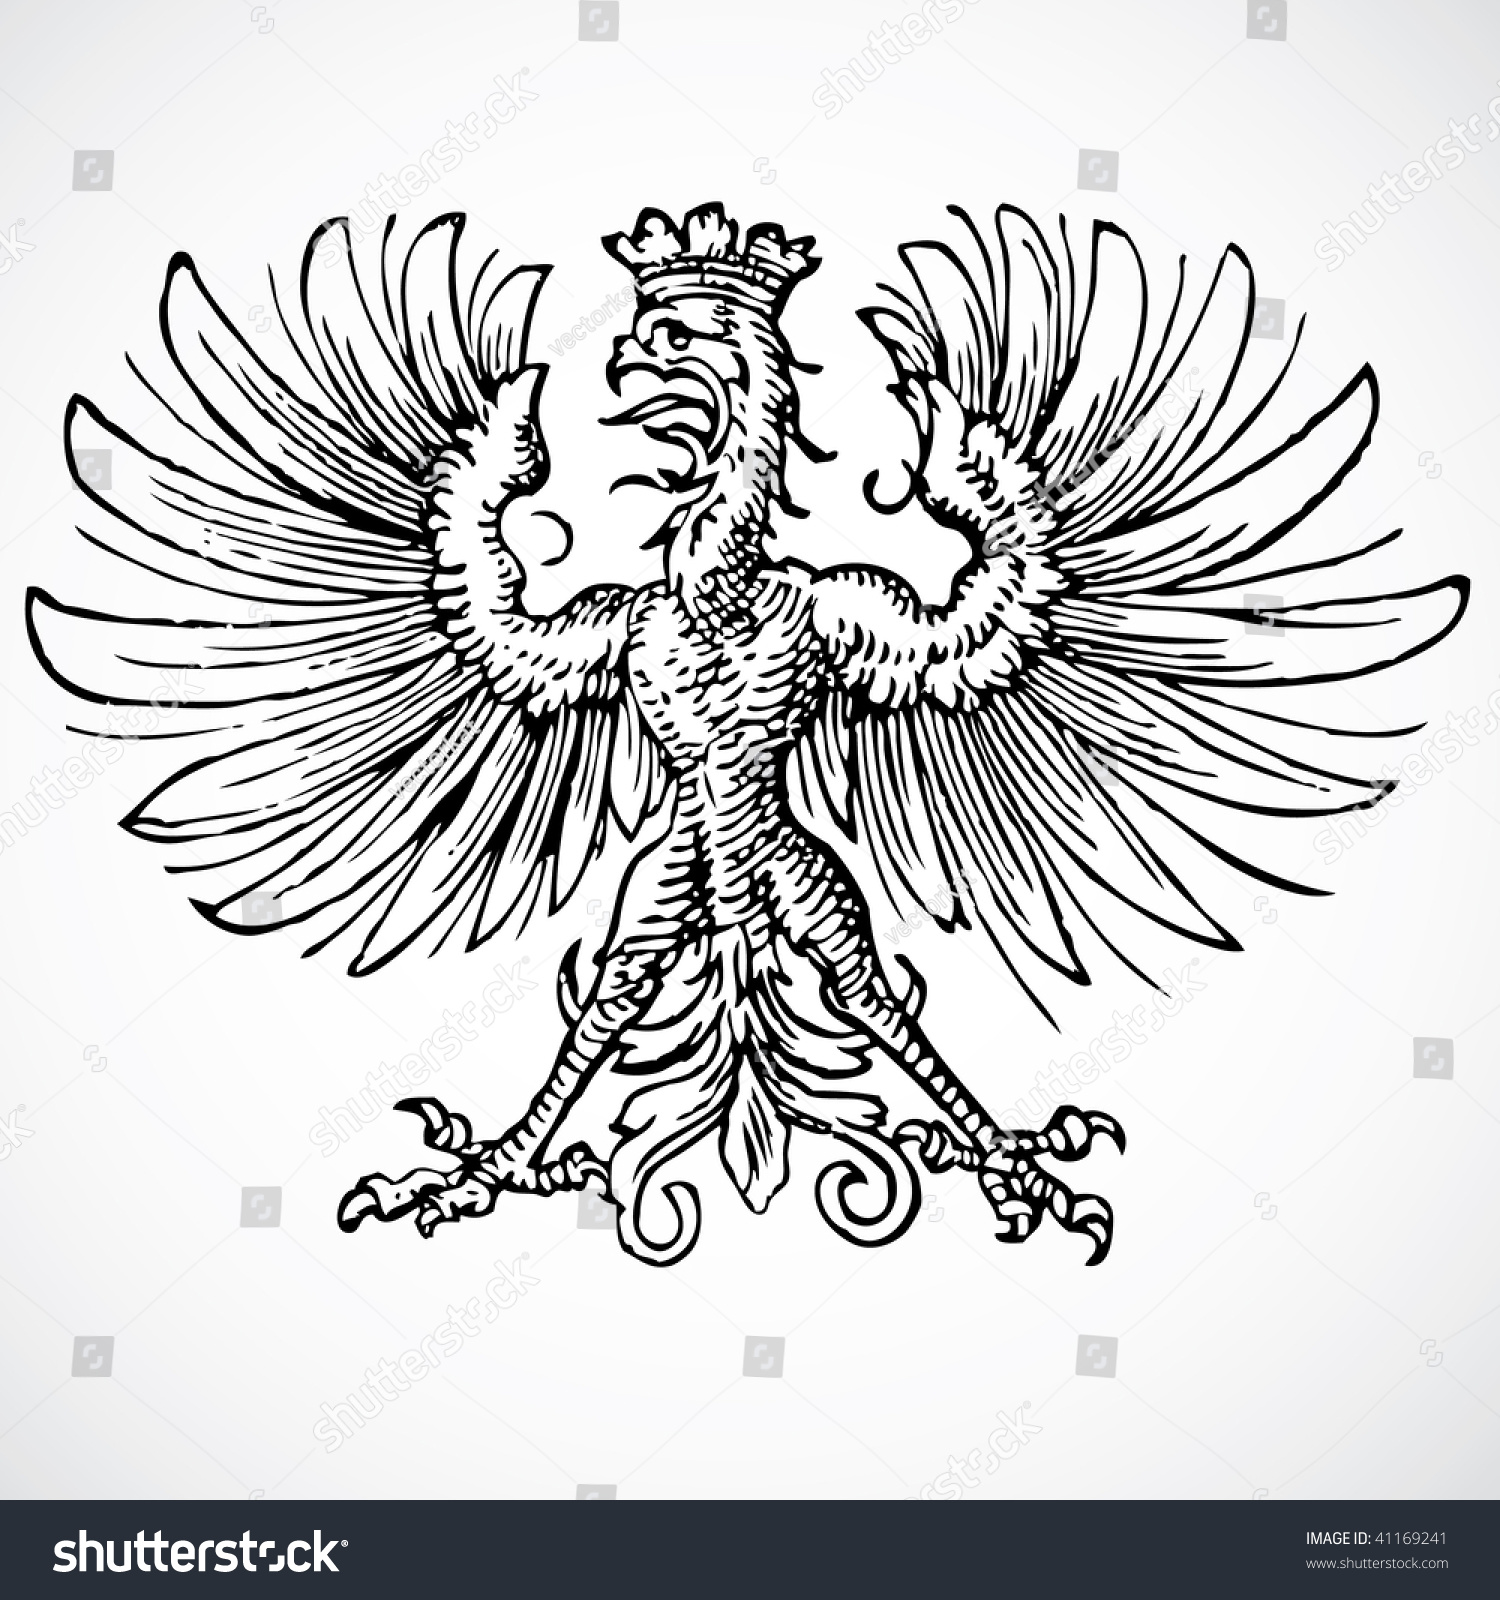 Vector Gothic Eagle - 41169241 : Shutterstock